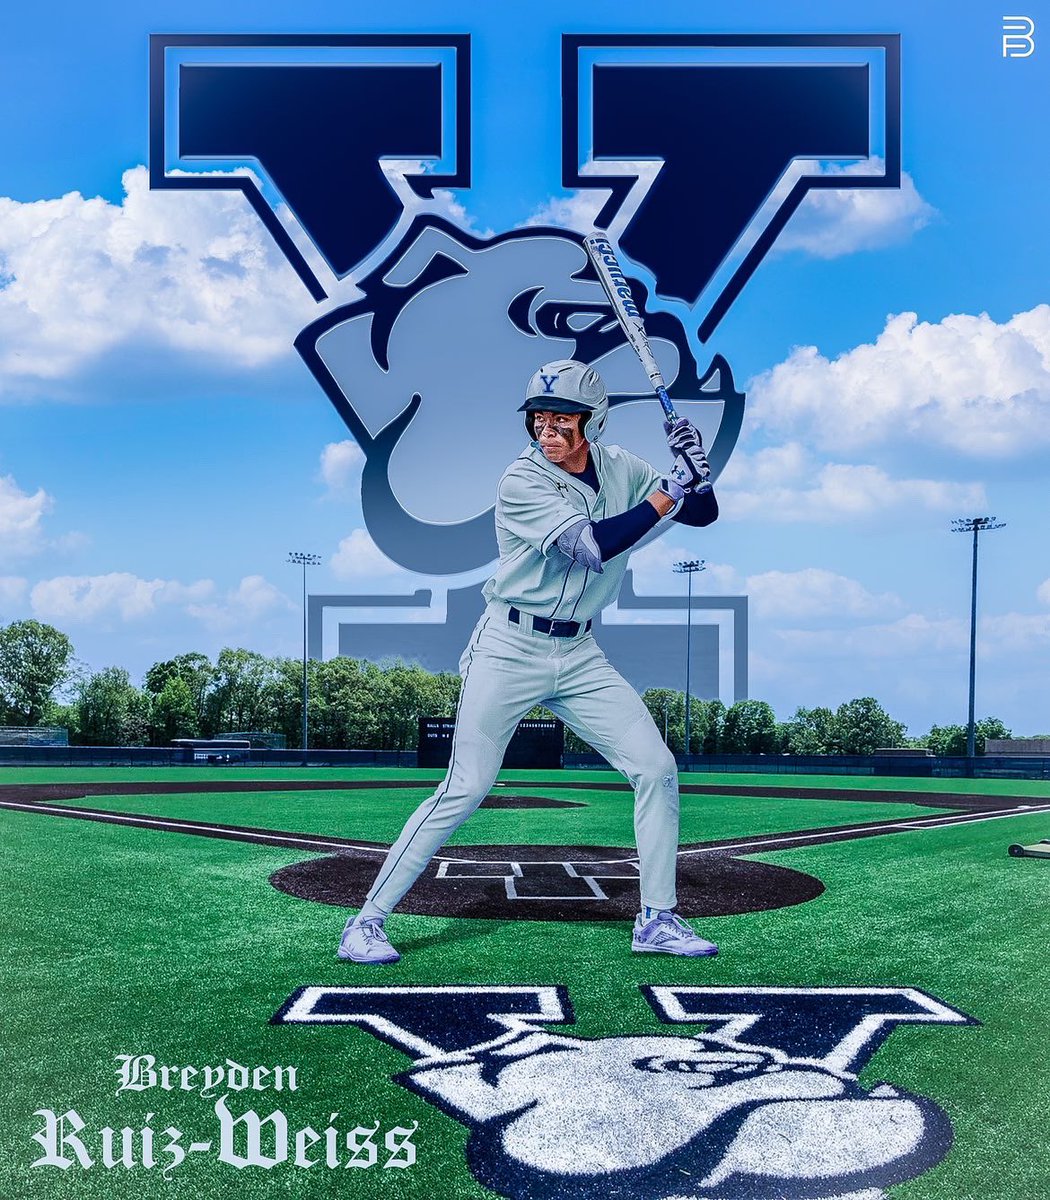 I am very excited to announce that I will be continuing my academic and athletic career at Yale University. I would like to thank my family, coaches, teachers, and teammates for helping me achieve my goals.#gobulldogs